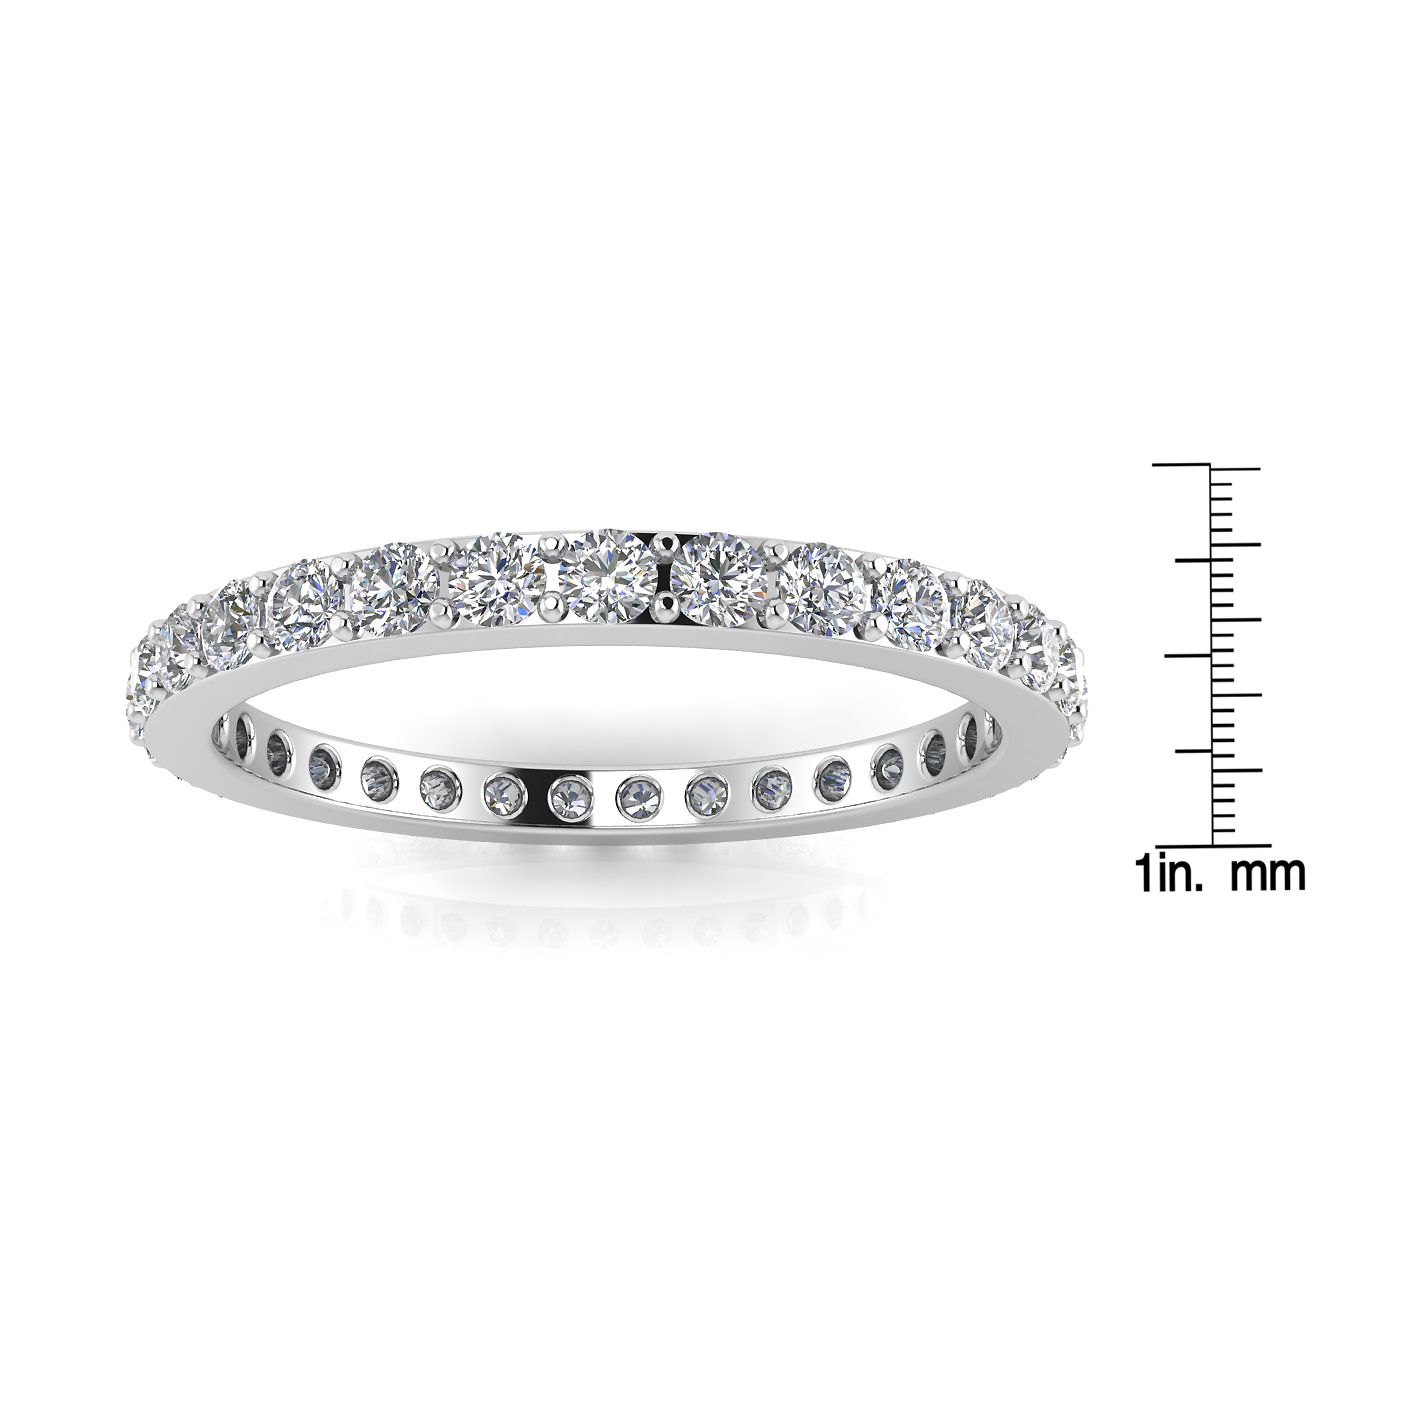 Round Brilliant Cut Diamond Pave Set Eternity Ring In 14k White Gold  (1.62ct. Tw.) Ring Size 9